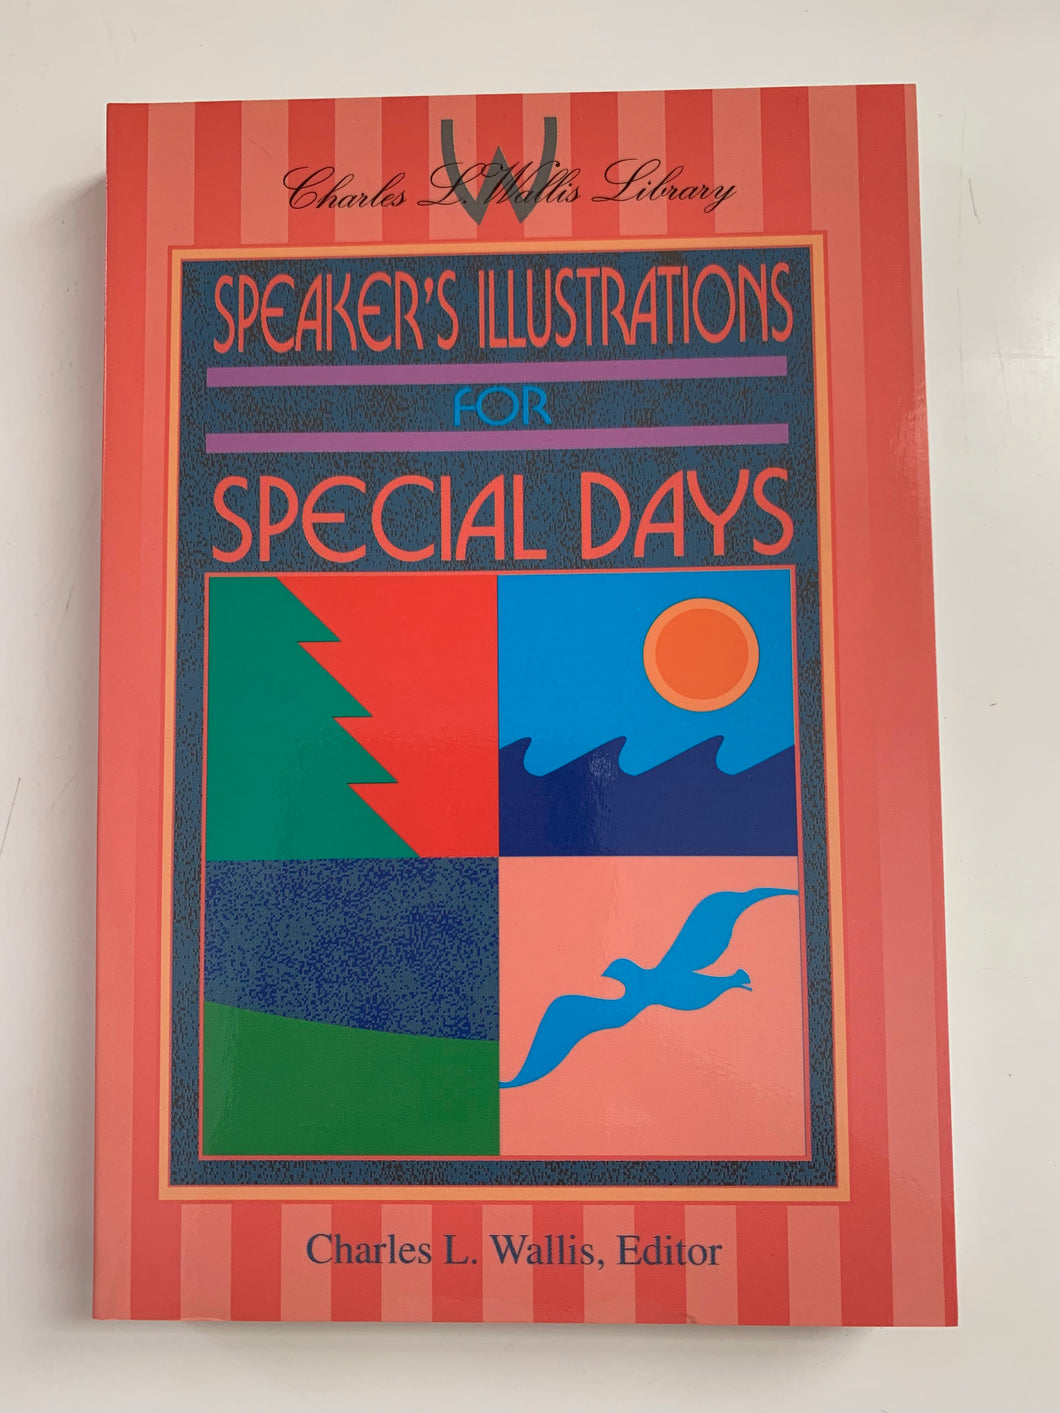 Speaker's Illustrations for Special Days by Charles L. Wallis